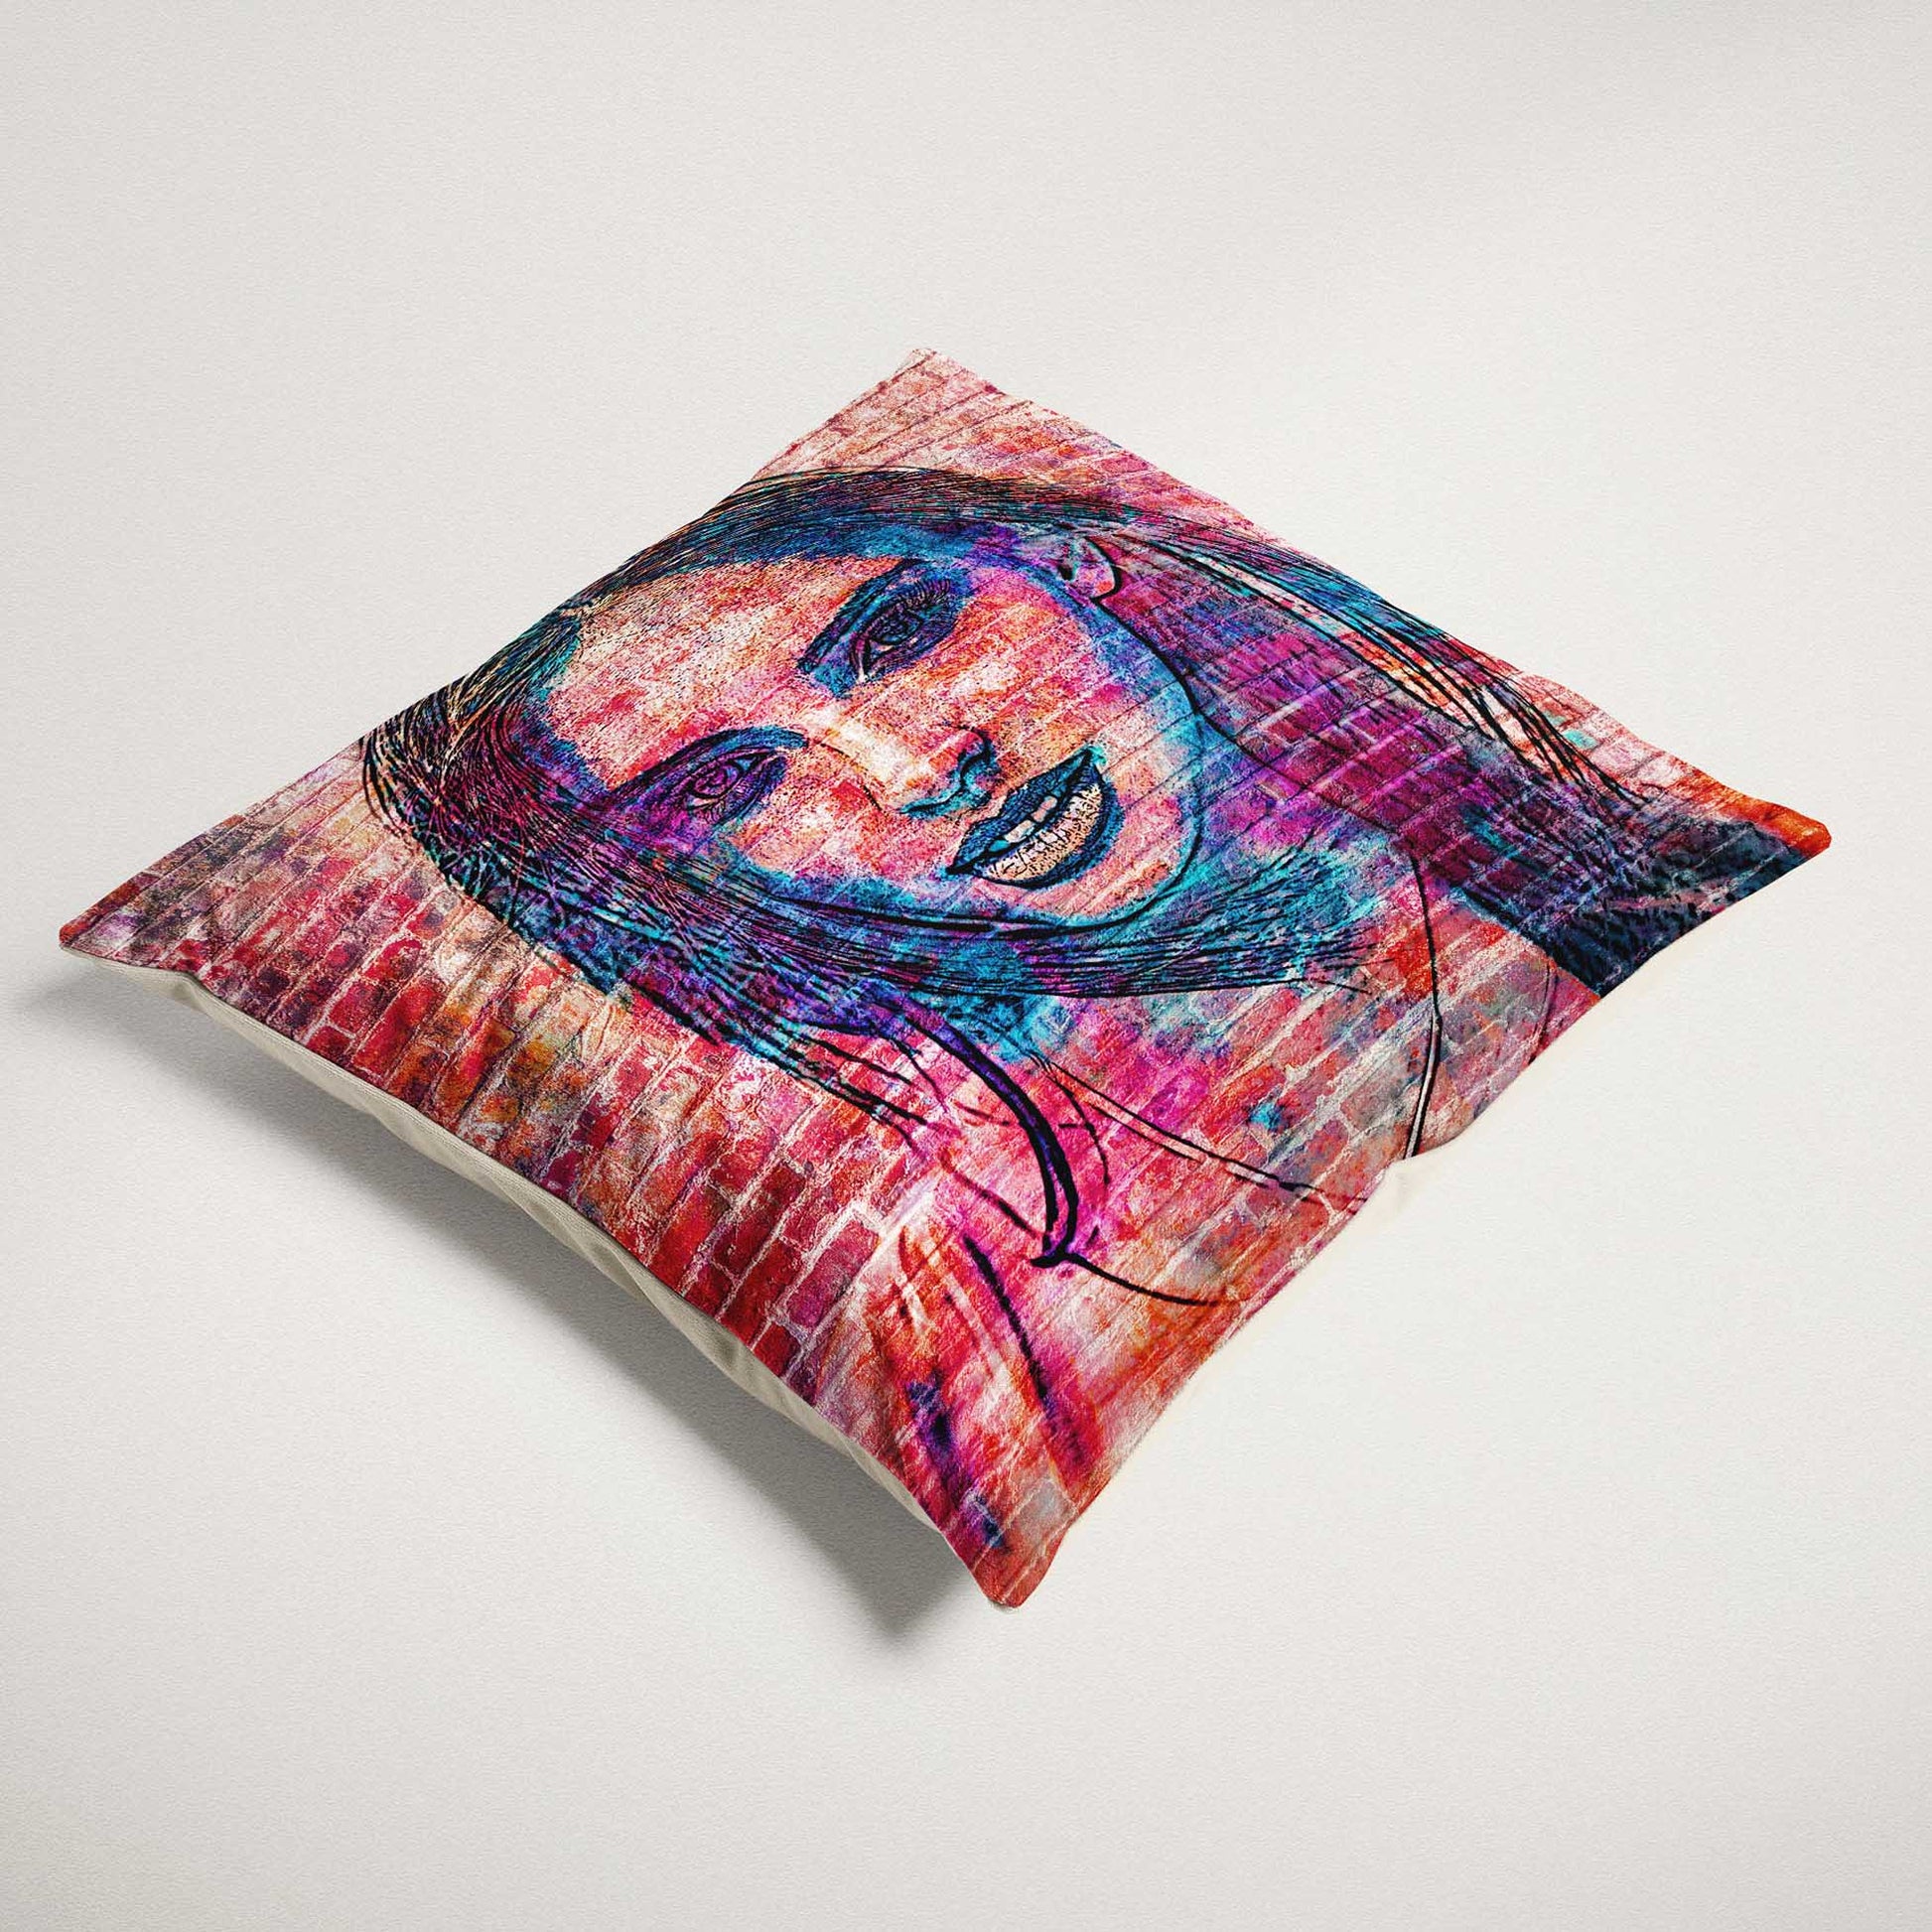 Express your artistic side with the Personalised Brick Graffiti Street Art Cushion. Handcrafted with care and made from soft velvet, it offers a plush and inviting feel. Personalise it with a print from your photo